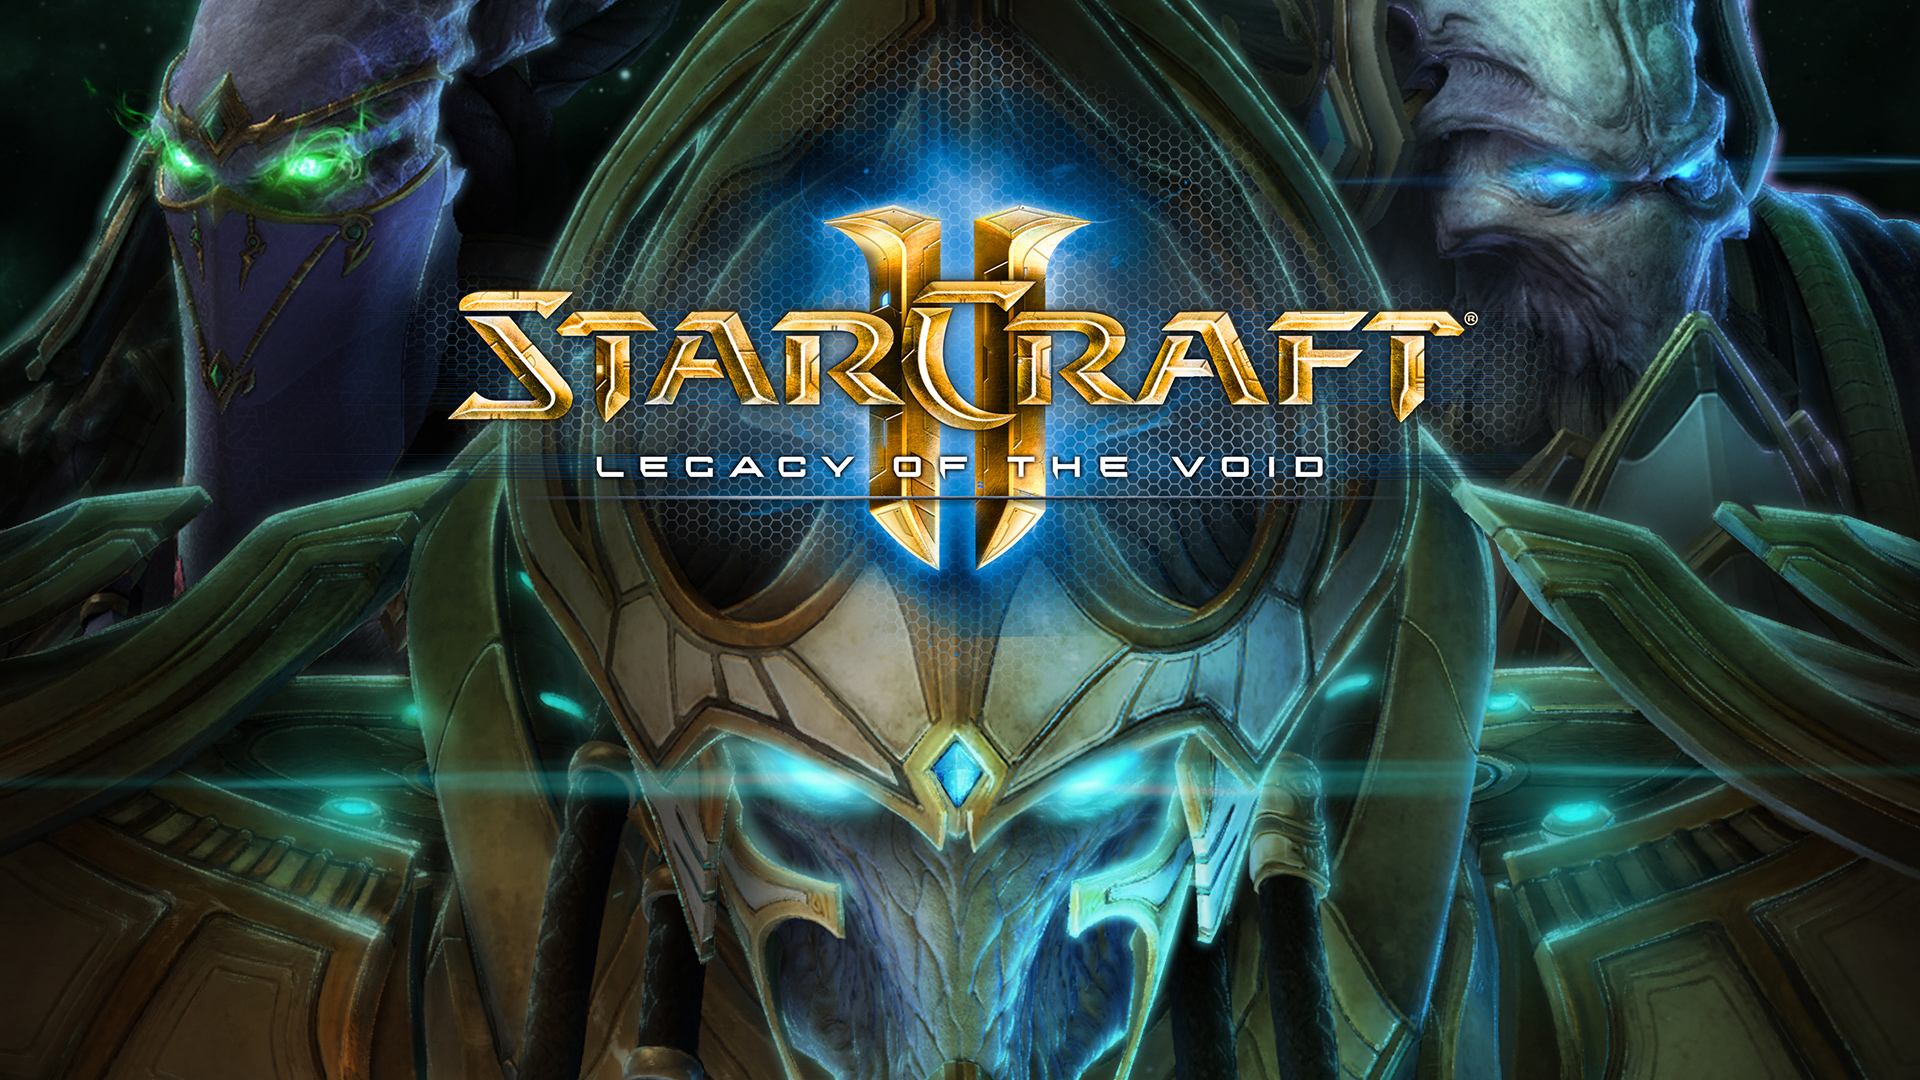 Poster of the void. Старкрафт Legacy of the Void. STARCRAFT 2 Legacy of the Void. STARCRAFT 2 Legacy of the Void Зилот. STARCRAFT II (2): Legacy of the Void.